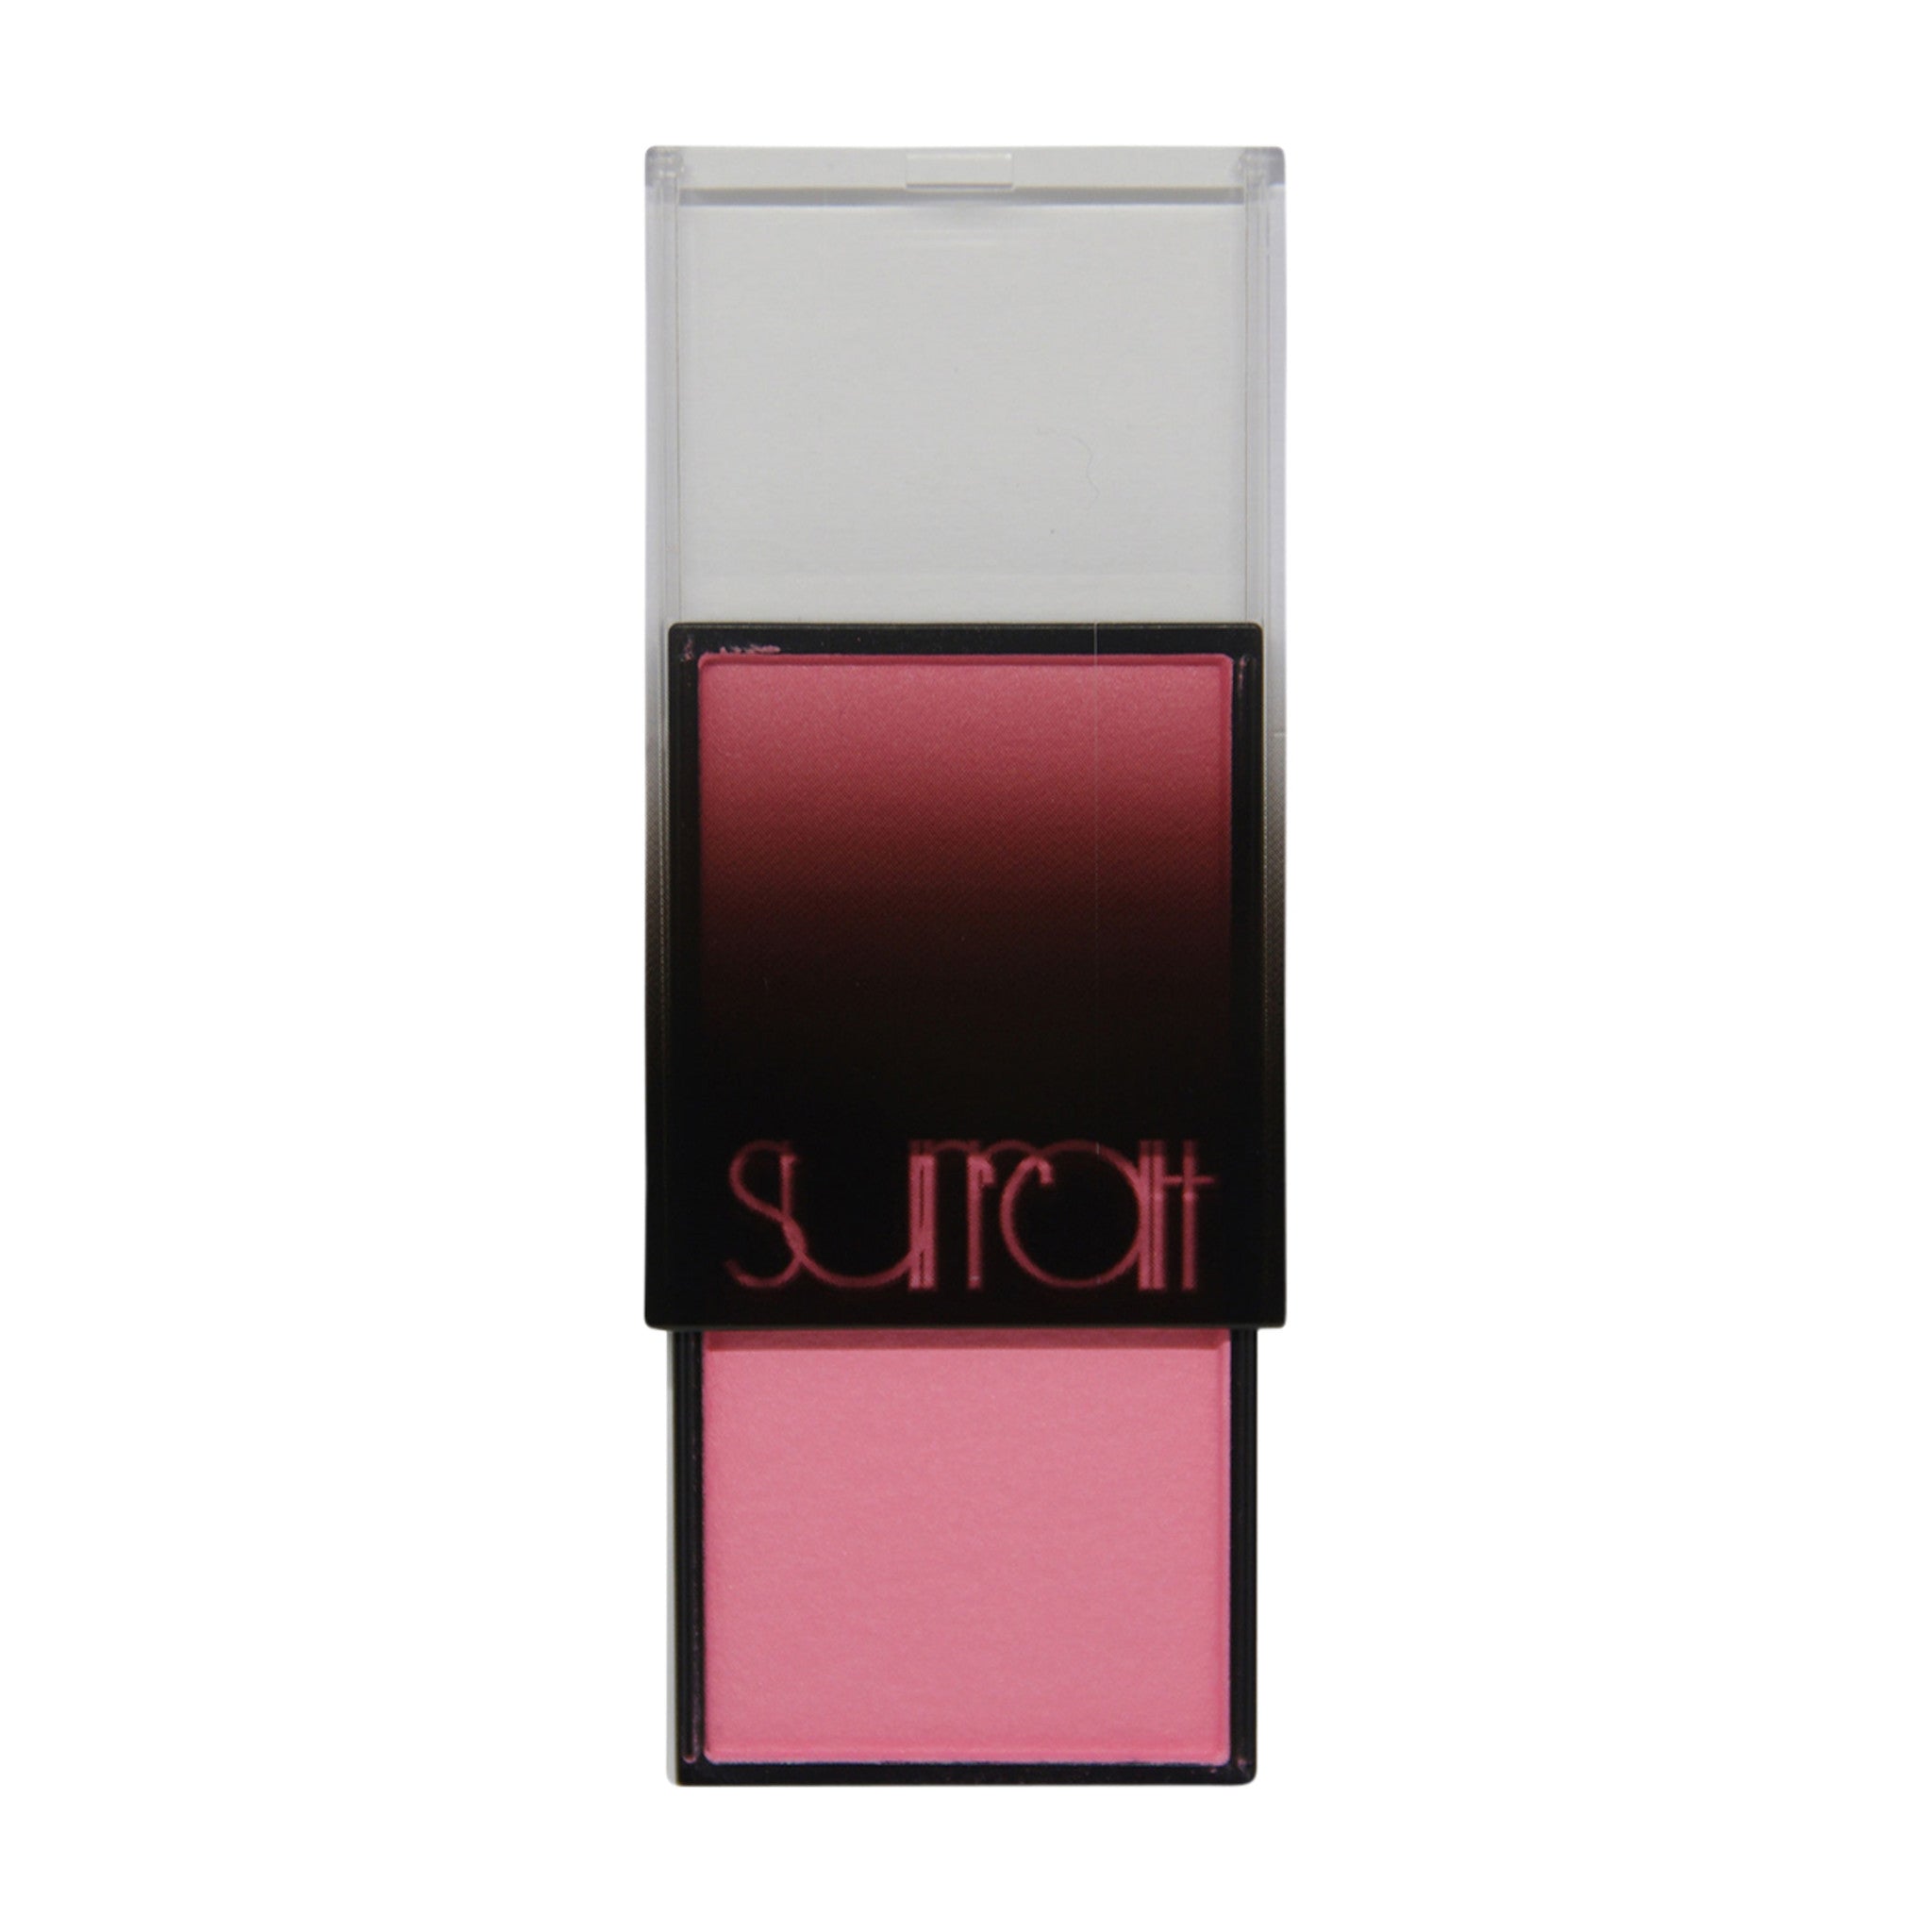 Surratt Artistique Blush Color/Shade variant: Tu Me Fais main image. This product is in the color pink